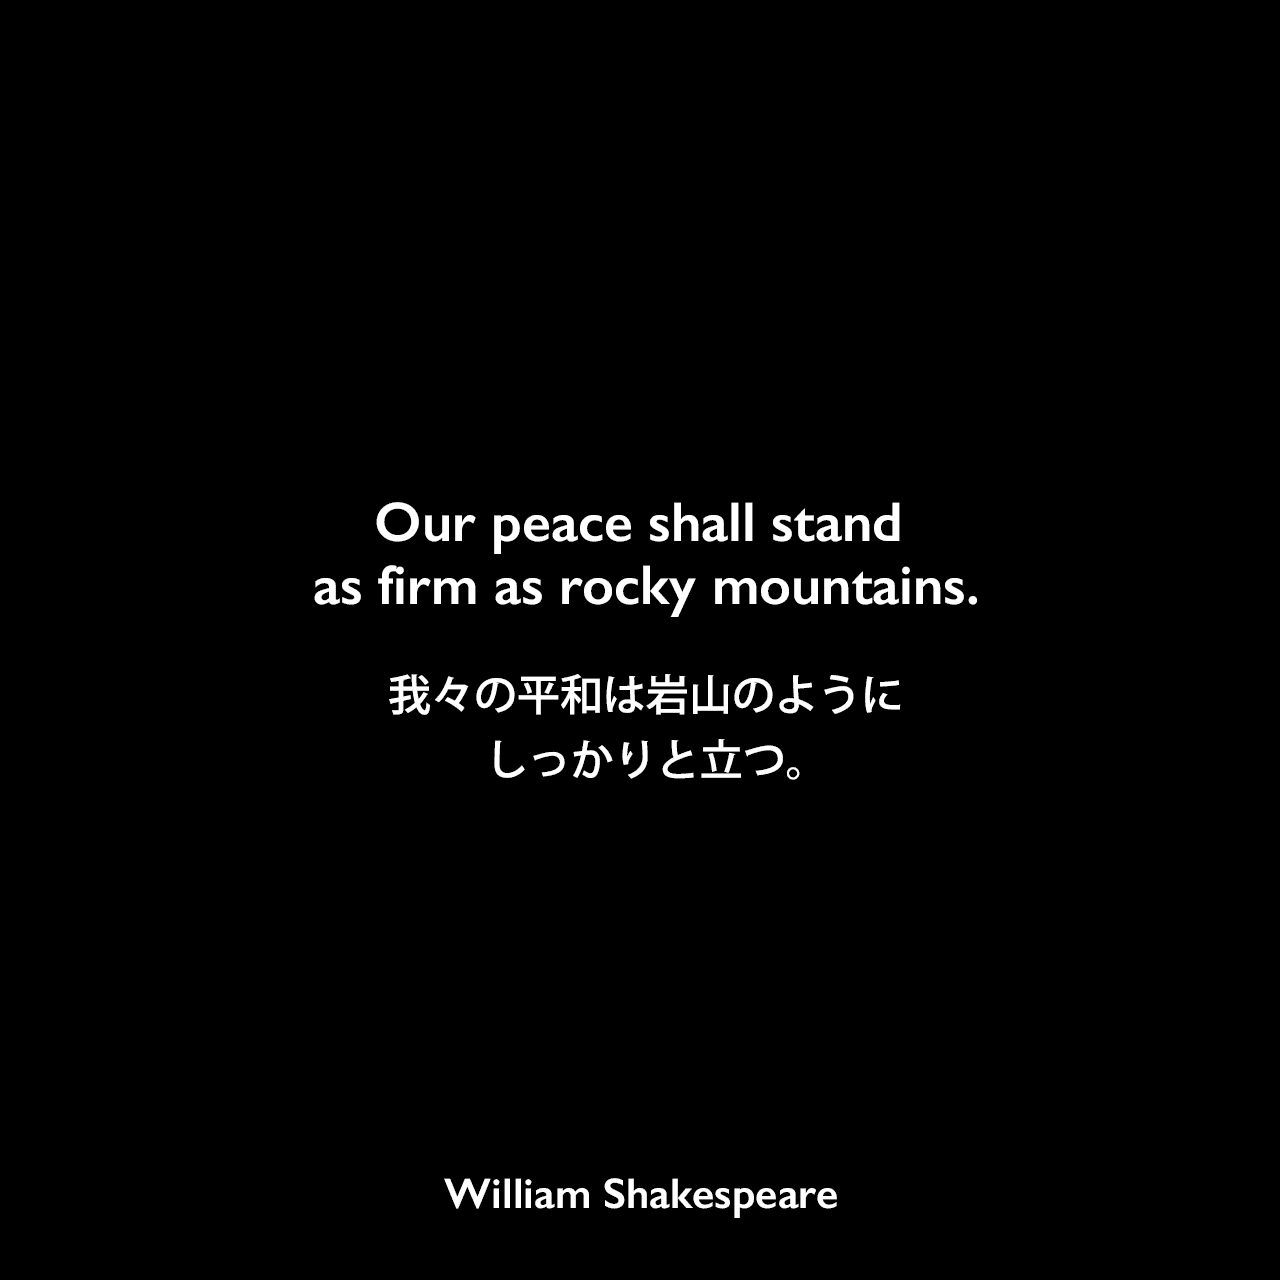 Our peace shall stand as firm as rocky mountains.我々の平和は岩山のようにしっかりと立つ。William Shakespeare